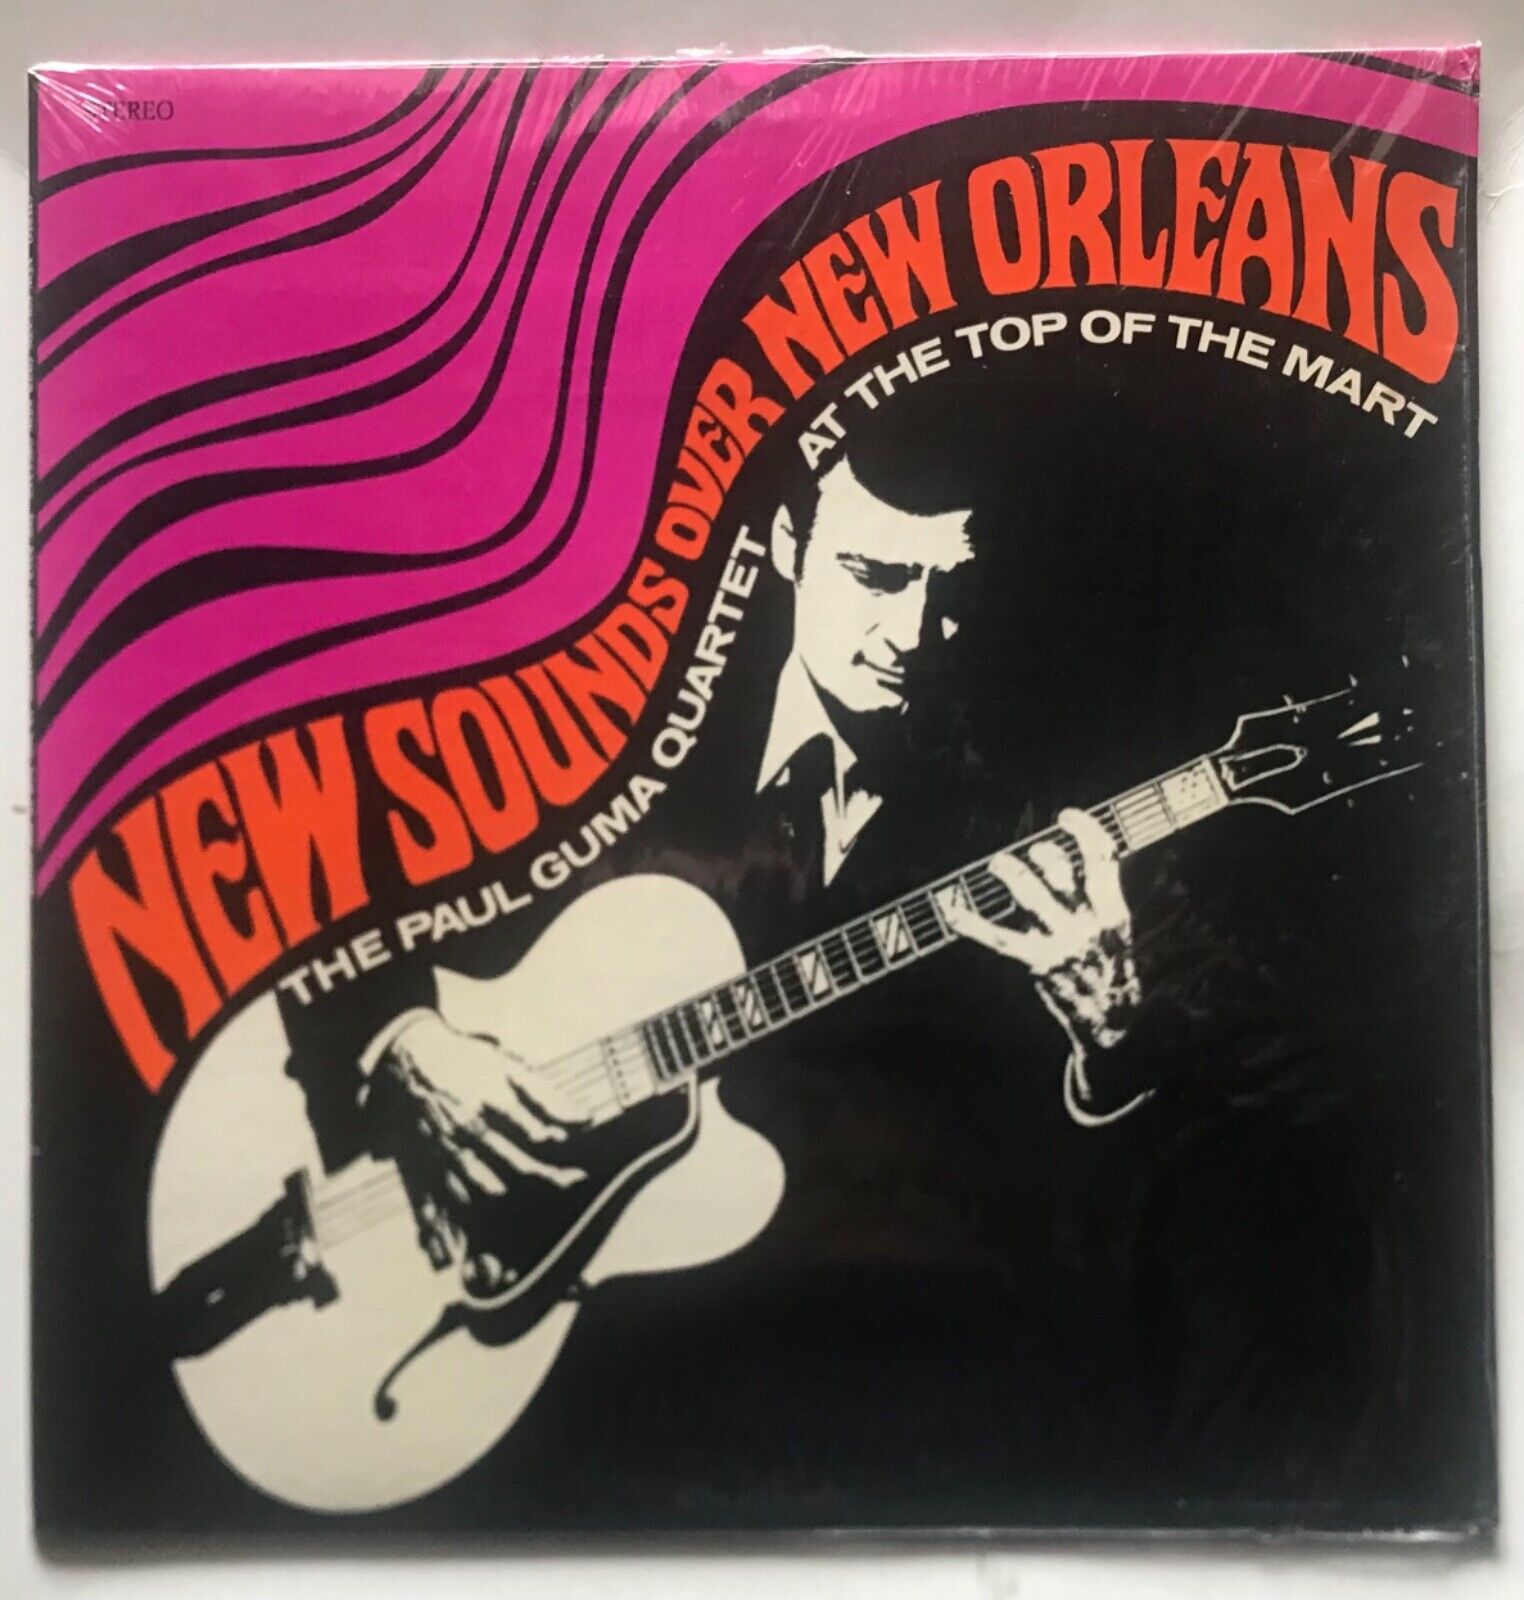 Paul Guma Quartet - New Sounds Over New Orleans, At The Top Of The Mart - RARE